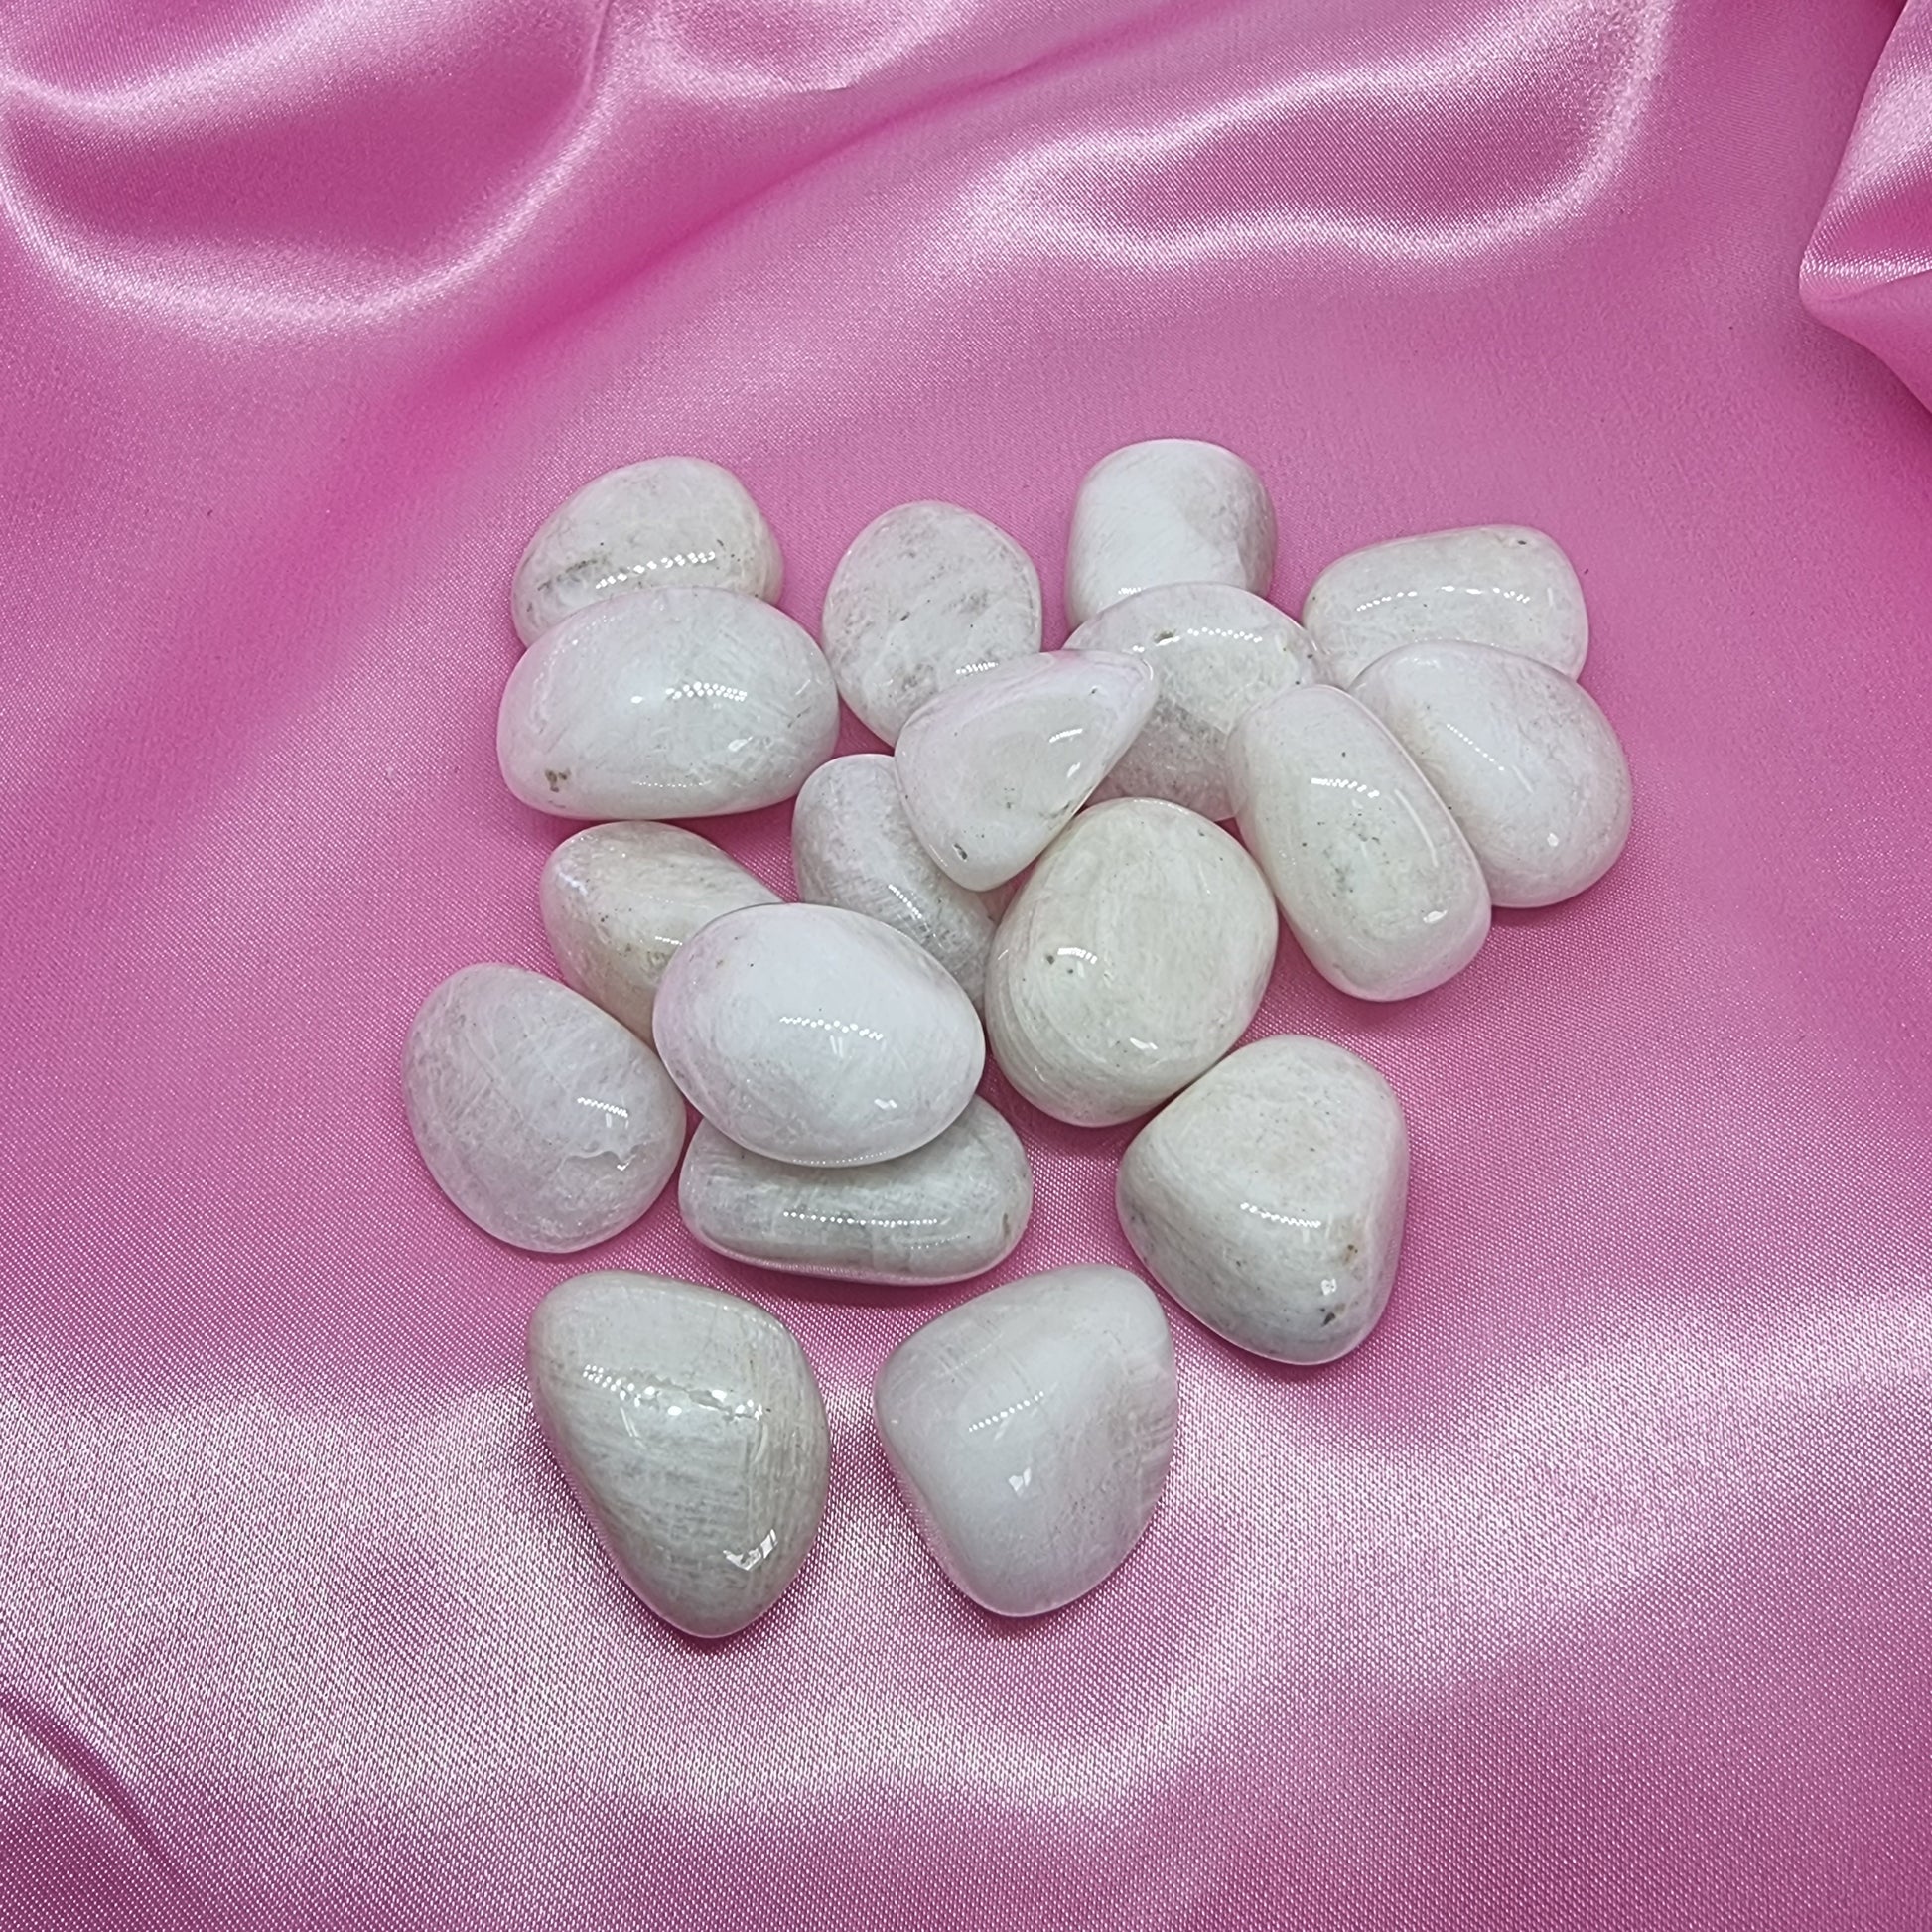 moonstone healing crystals sold at mind soul sync crystal shop in australia.